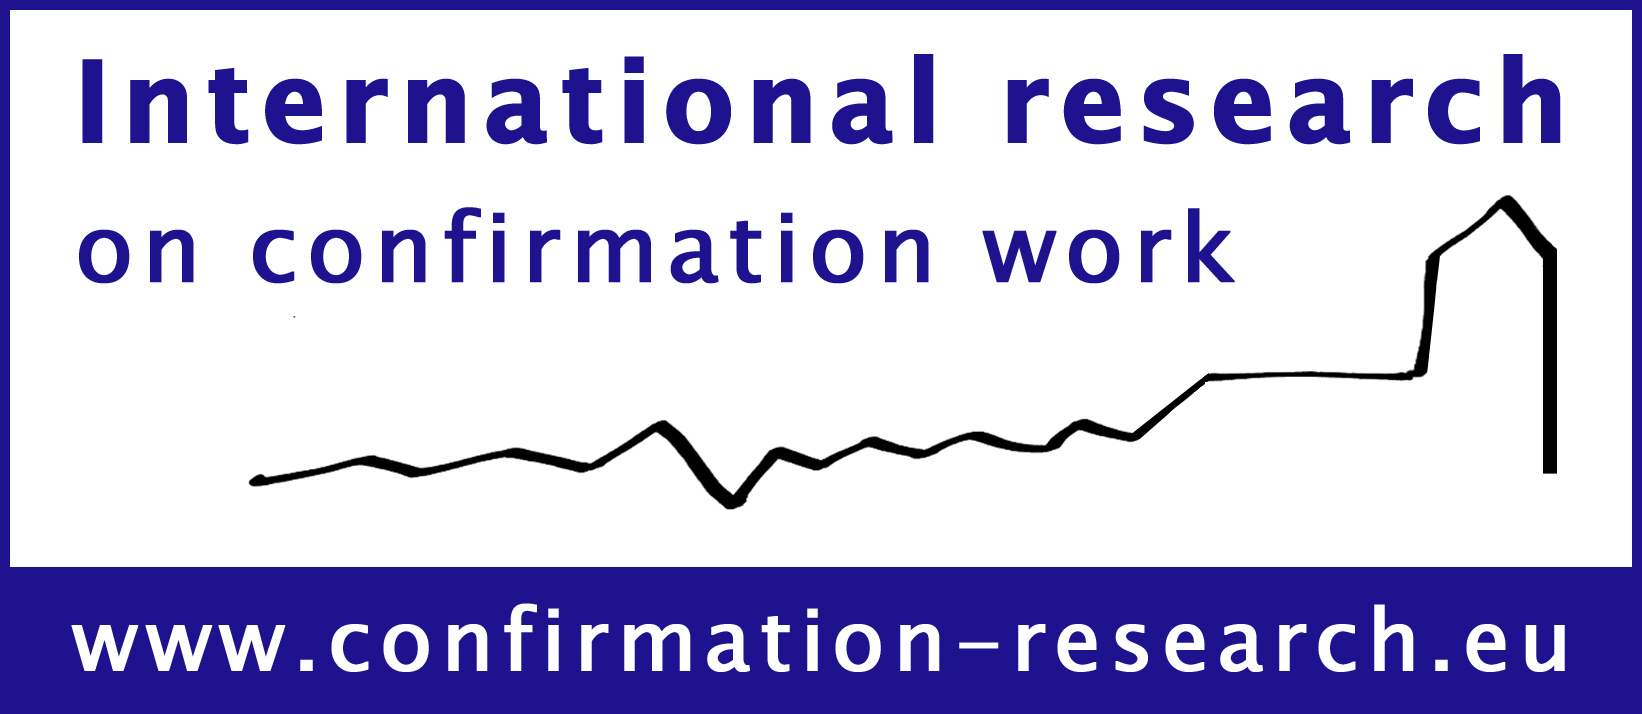 International research on confirmation work